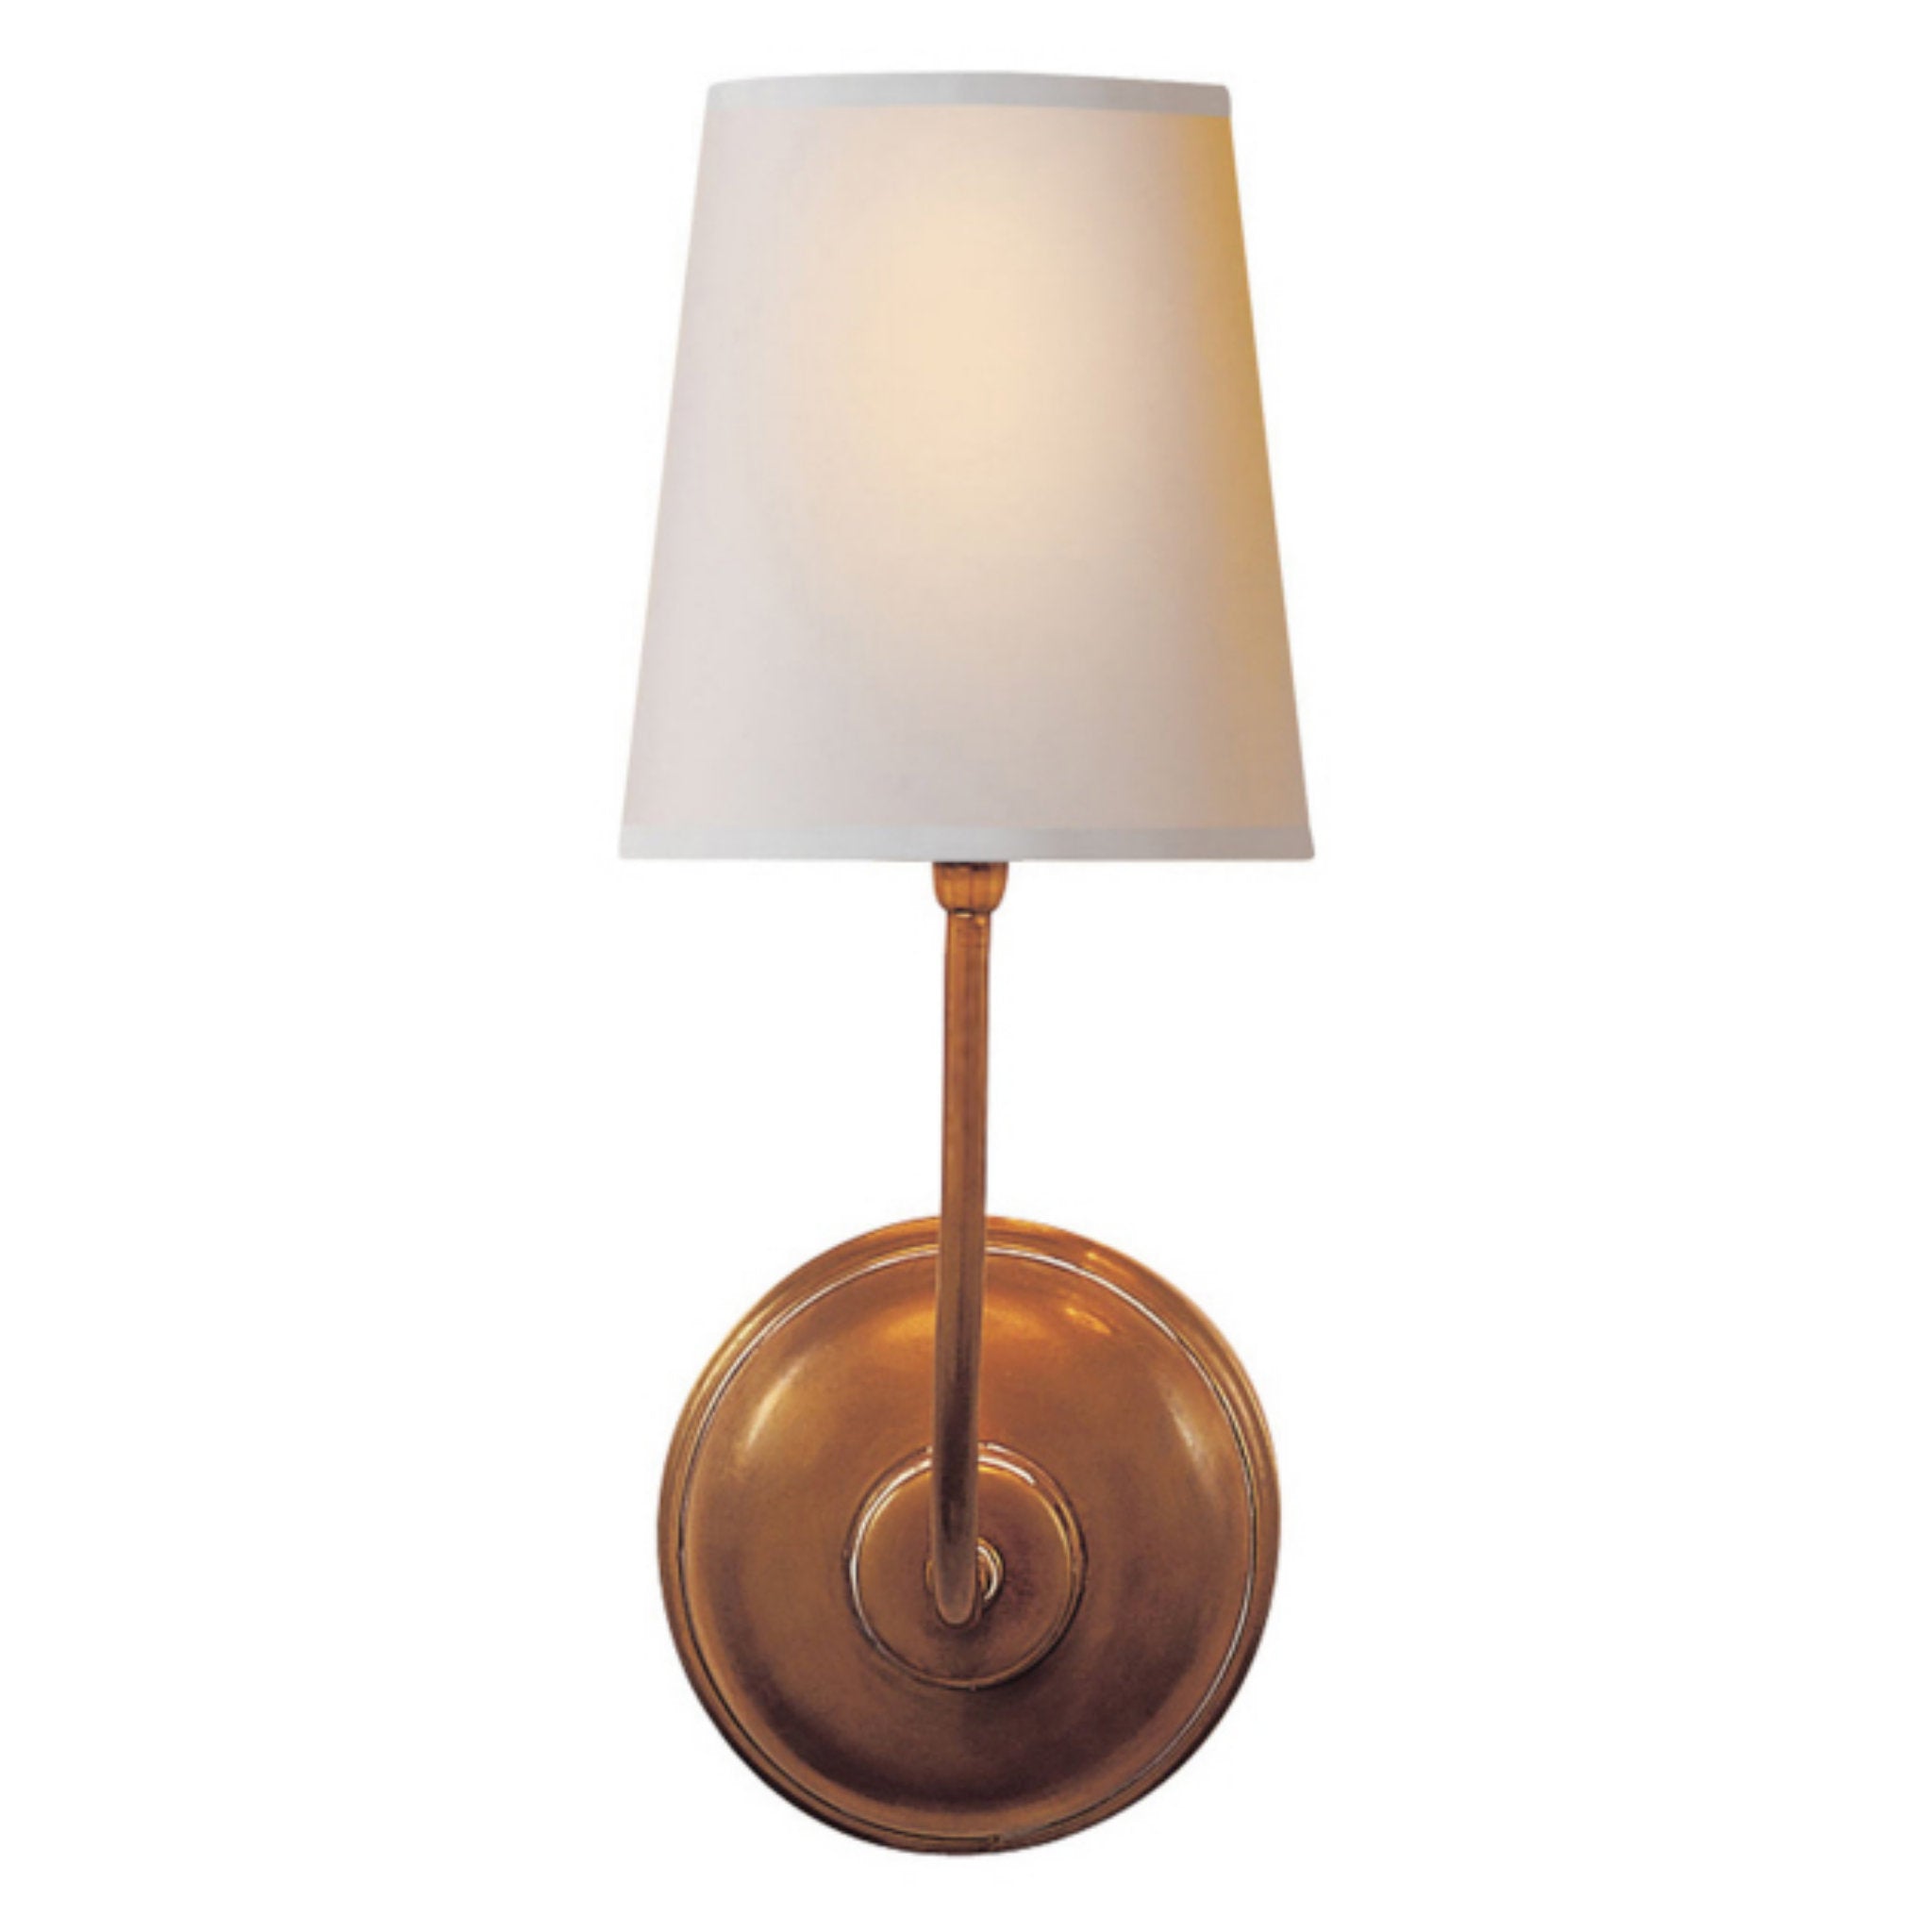 Thomas O'Brien Vendome Single Sconce in Hand-Rubbed Antique Brass with